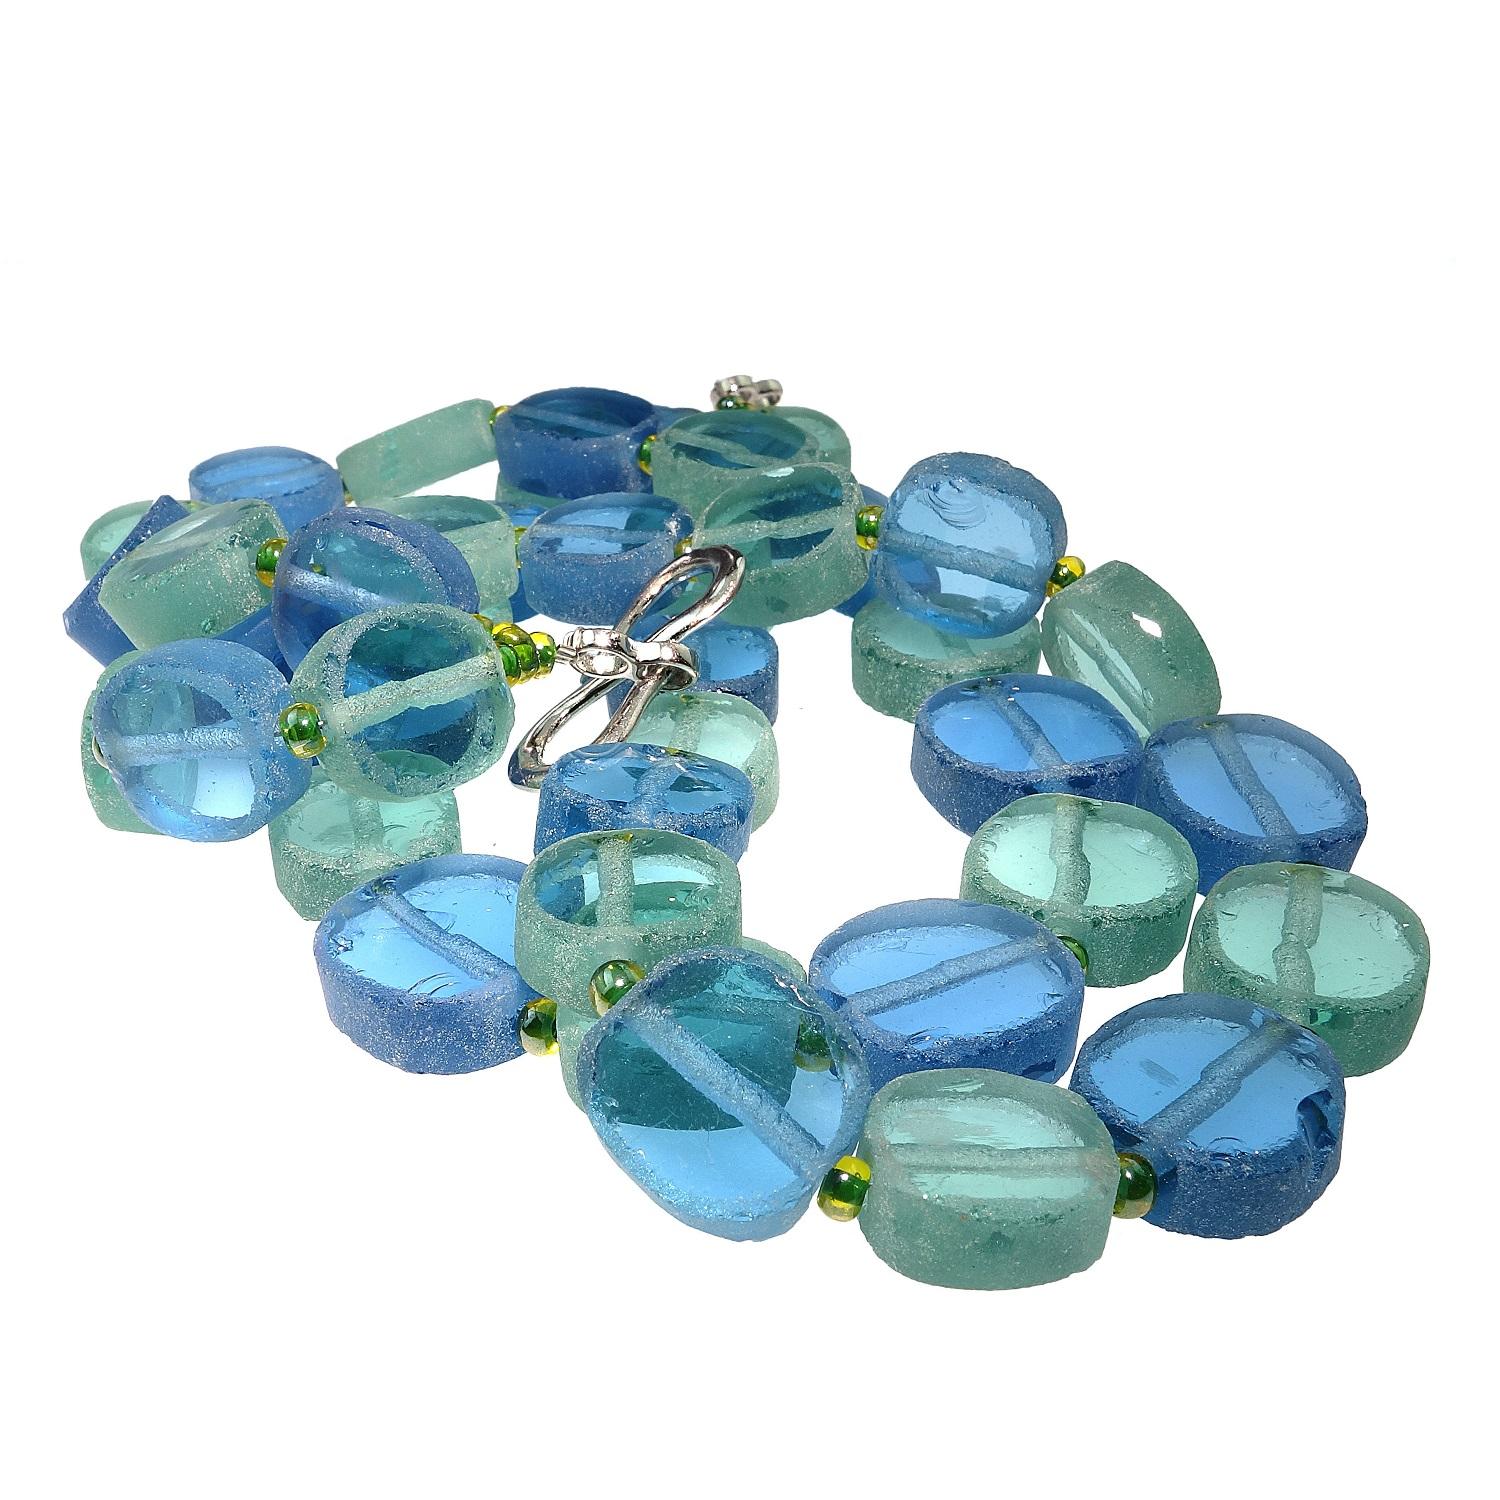 Custom made necklace of two strands of alternating Bue and Aqua green sea glass. These off round discs of sea glass is polished on the flat sides and frosted on the edges and spaced with small Czech beads. The unique necklace is finished with a